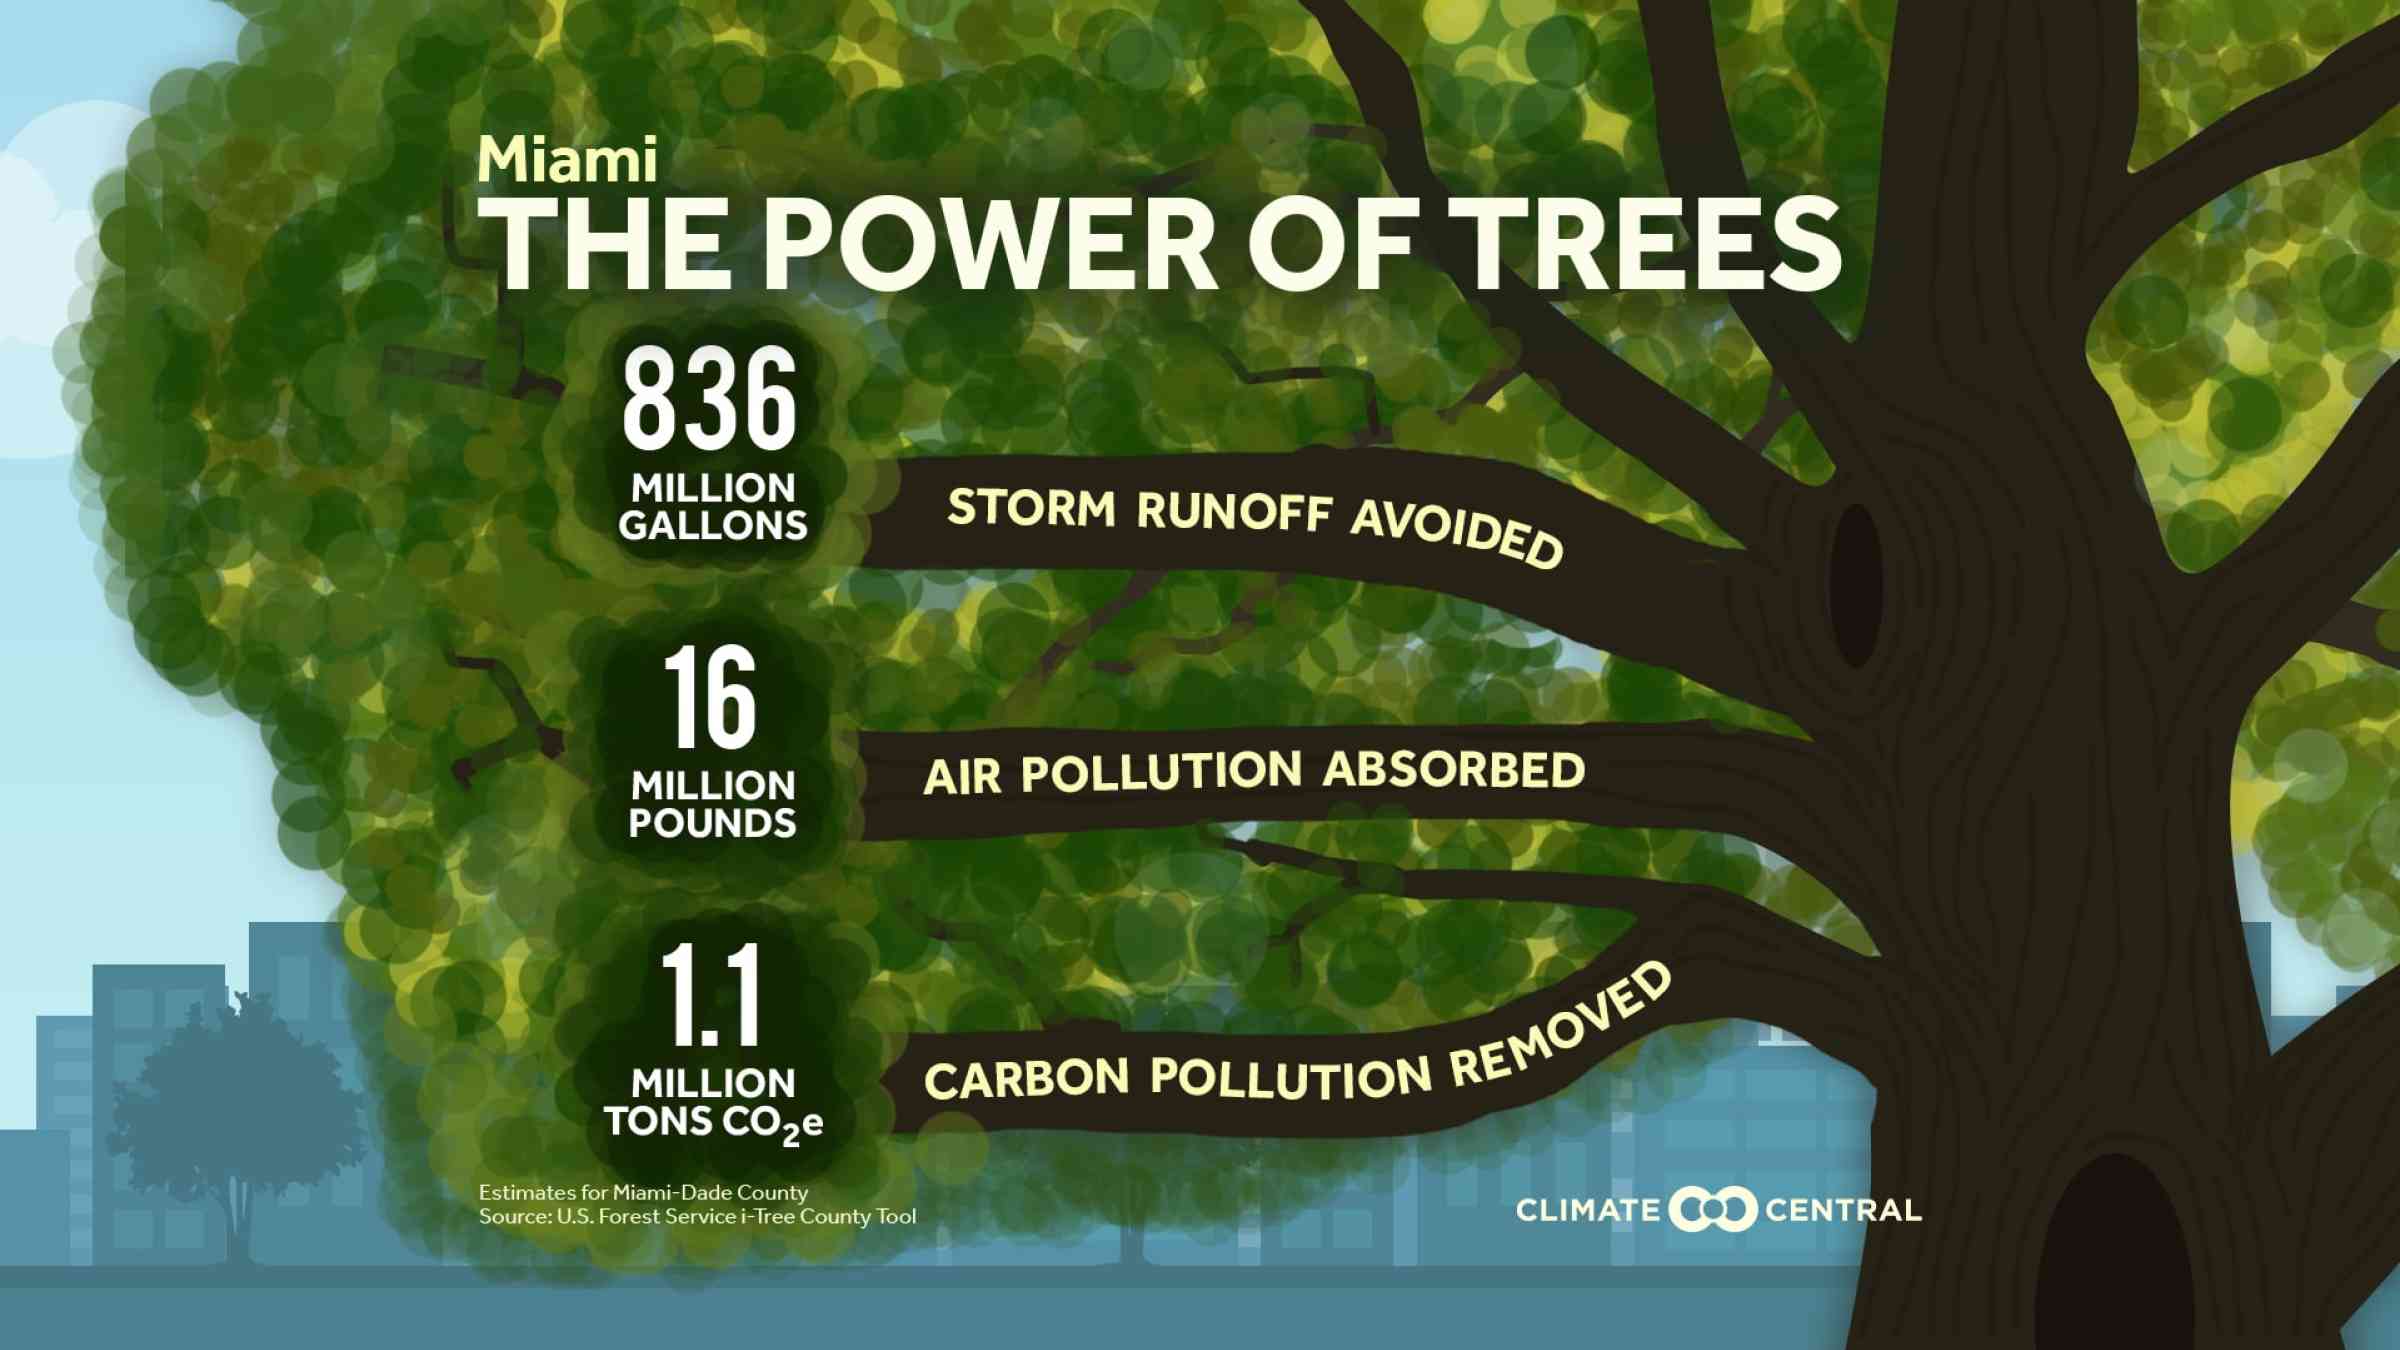 Graphic showing the power of trees